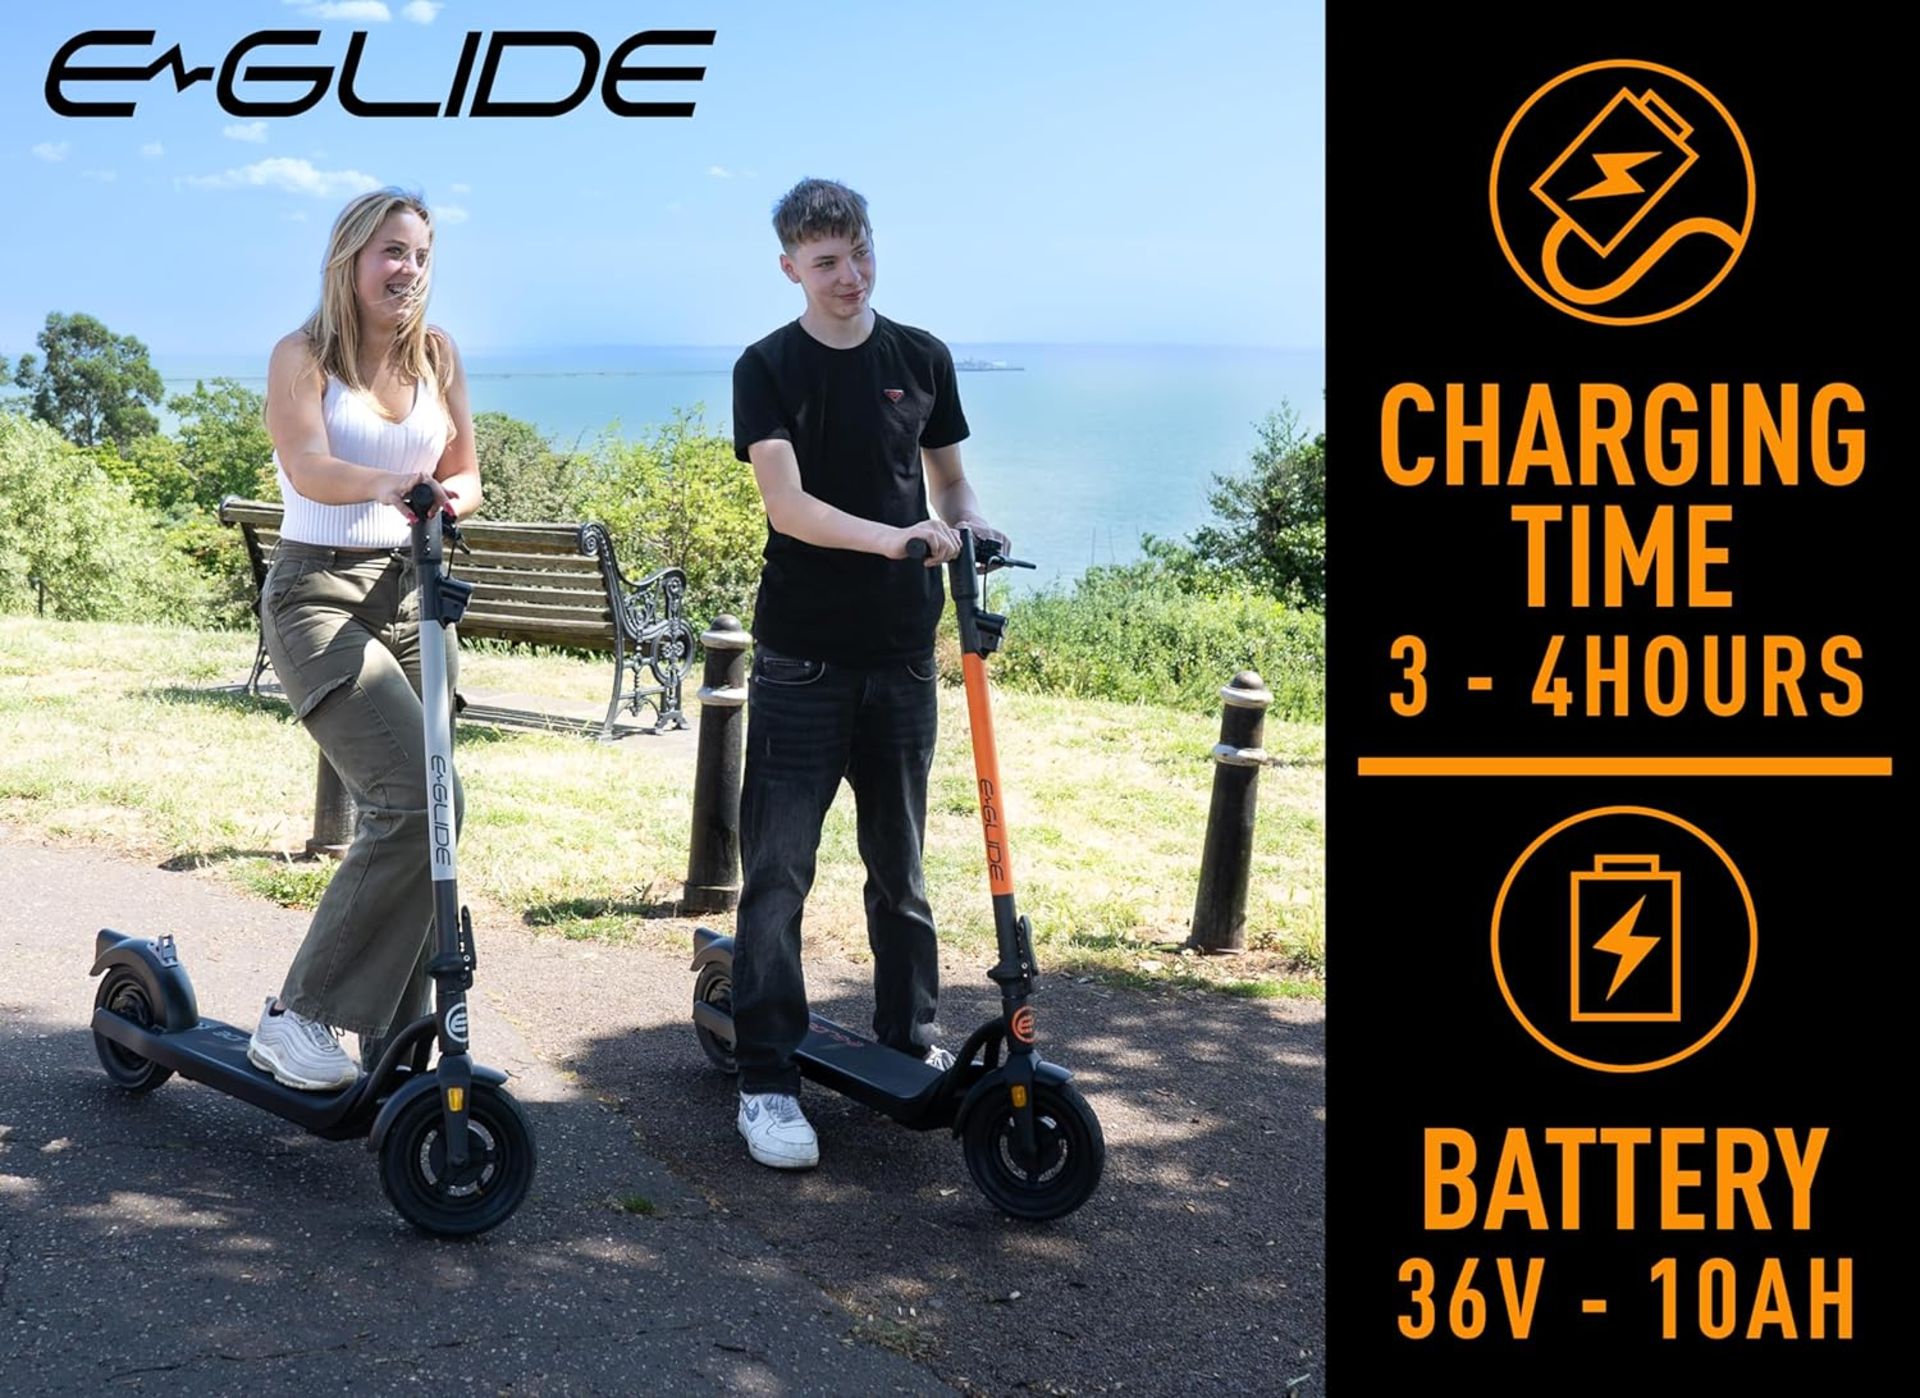 Brand New E-Glide V2 Electric Scooter Orange and Black RRP £599, Introducing a sleek and efficient - Image 4 of 6